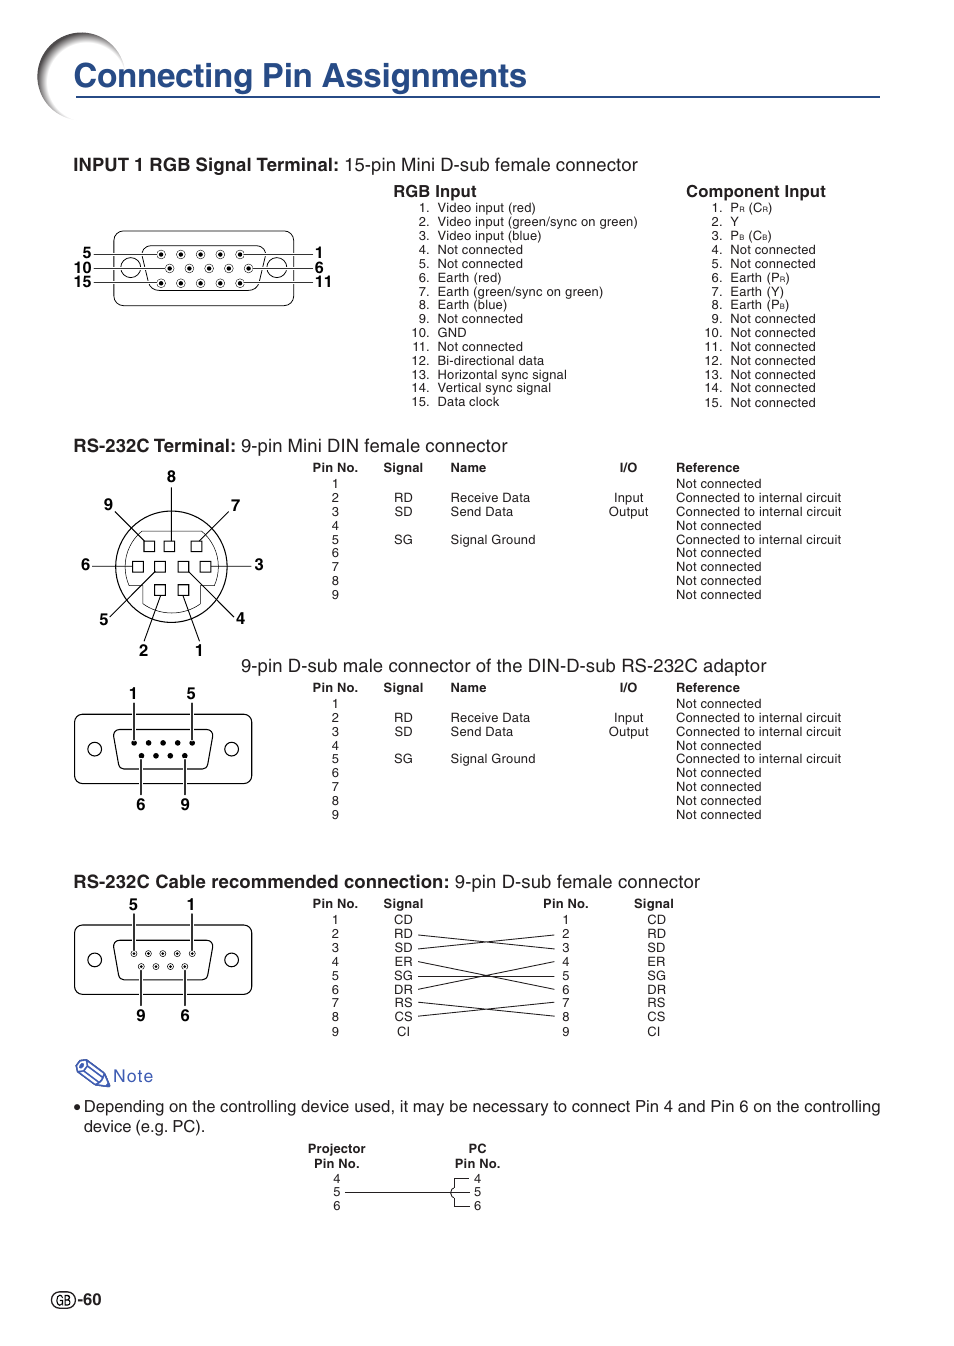 Connecting pin assignments, For connection of an rs-232c, Rs-232c terminal: 9-pin mini din female connector | Sharp PG-A10X User Manual | Page 64 / 74